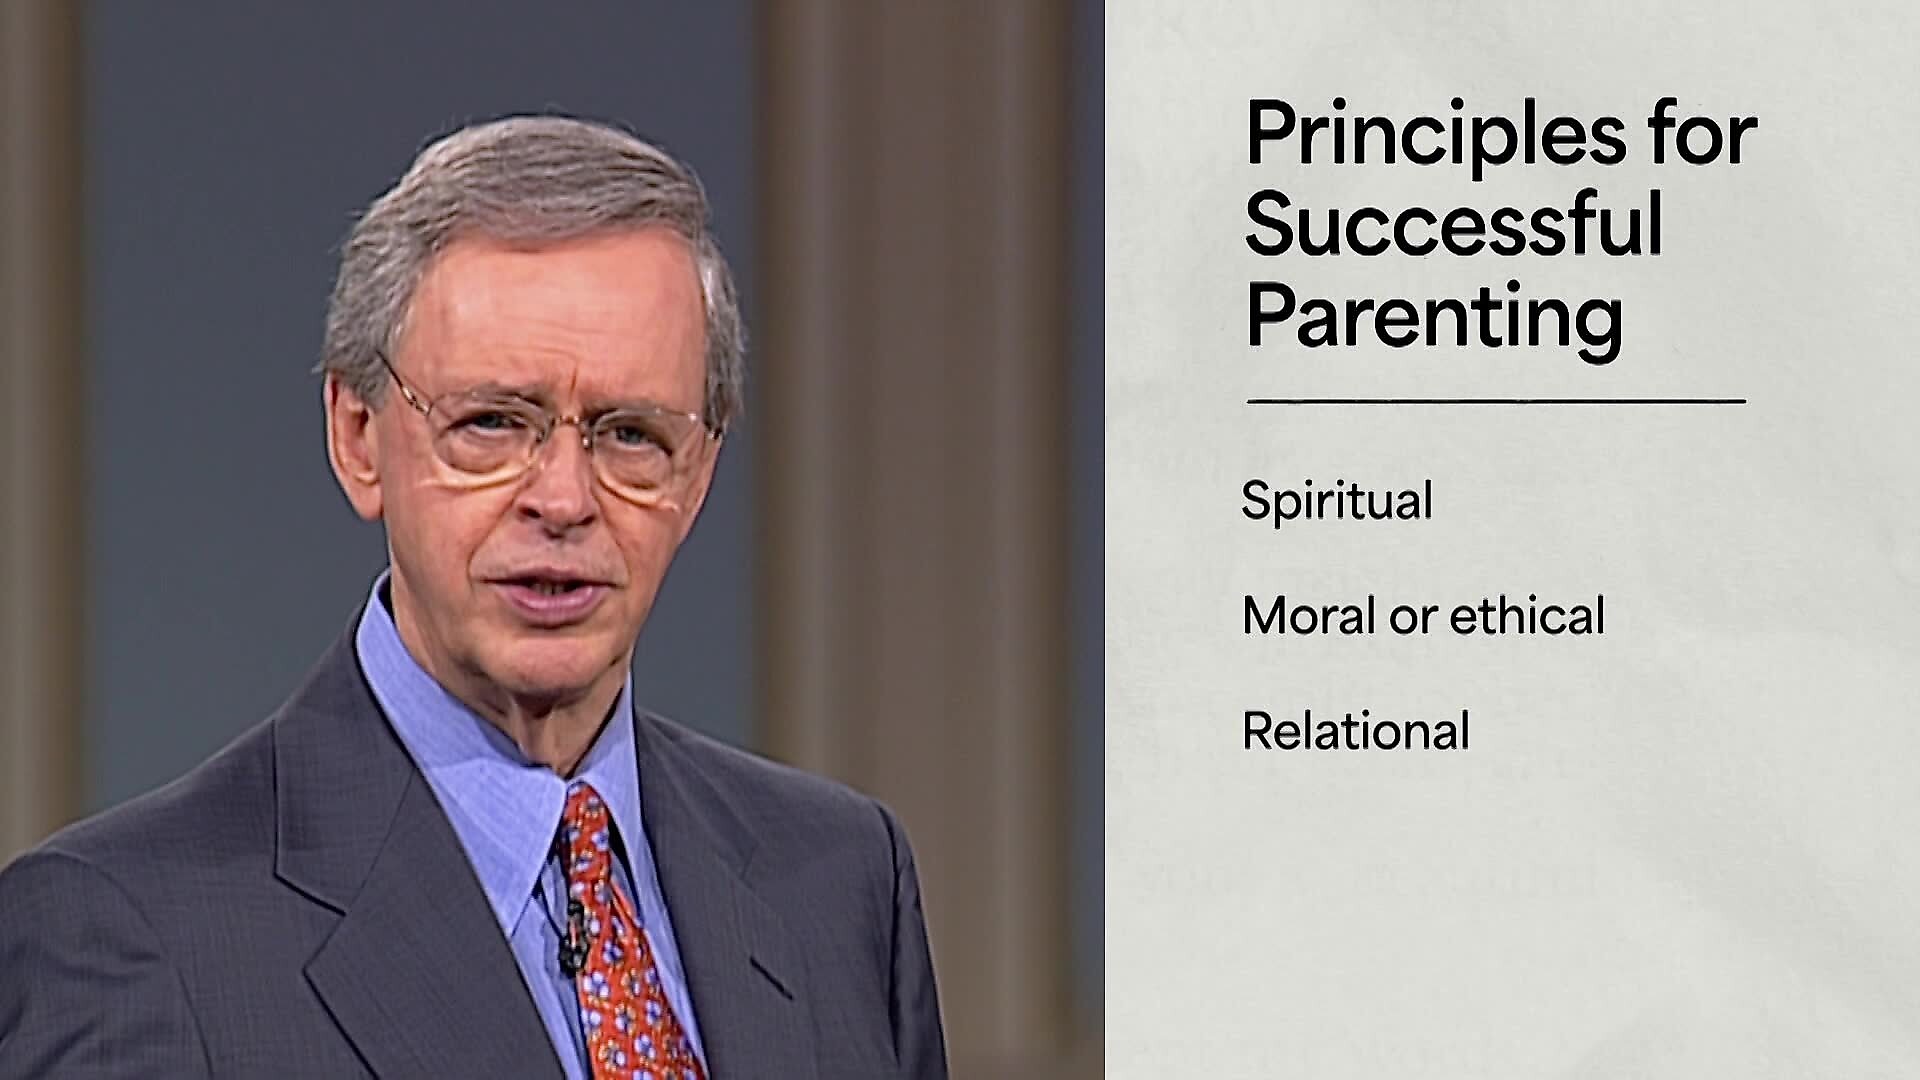 Keys to Successful Parenting